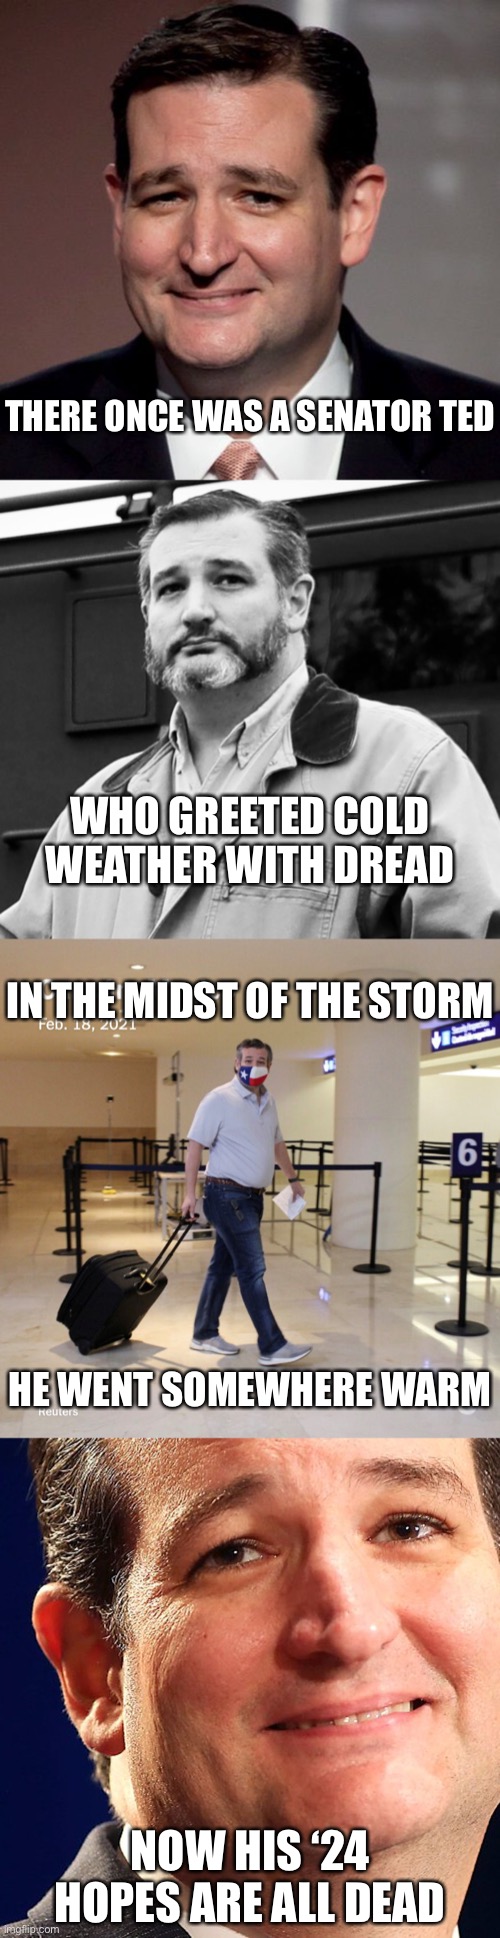 Limerick about Ted Cruz | THERE ONCE WAS A SENATOR TED; WHO GREETED COLD WEATHER WITH DREAD; IN THE MIDST OF THE STORM; HE WENT SOMEWHERE WARM; NOW HIS ‘24 HOPES ARE ALL DEAD | image tagged in ted cruz,ted cruz beard,ted cruz cancun,politics,republicans,limerick | made w/ Imgflip meme maker